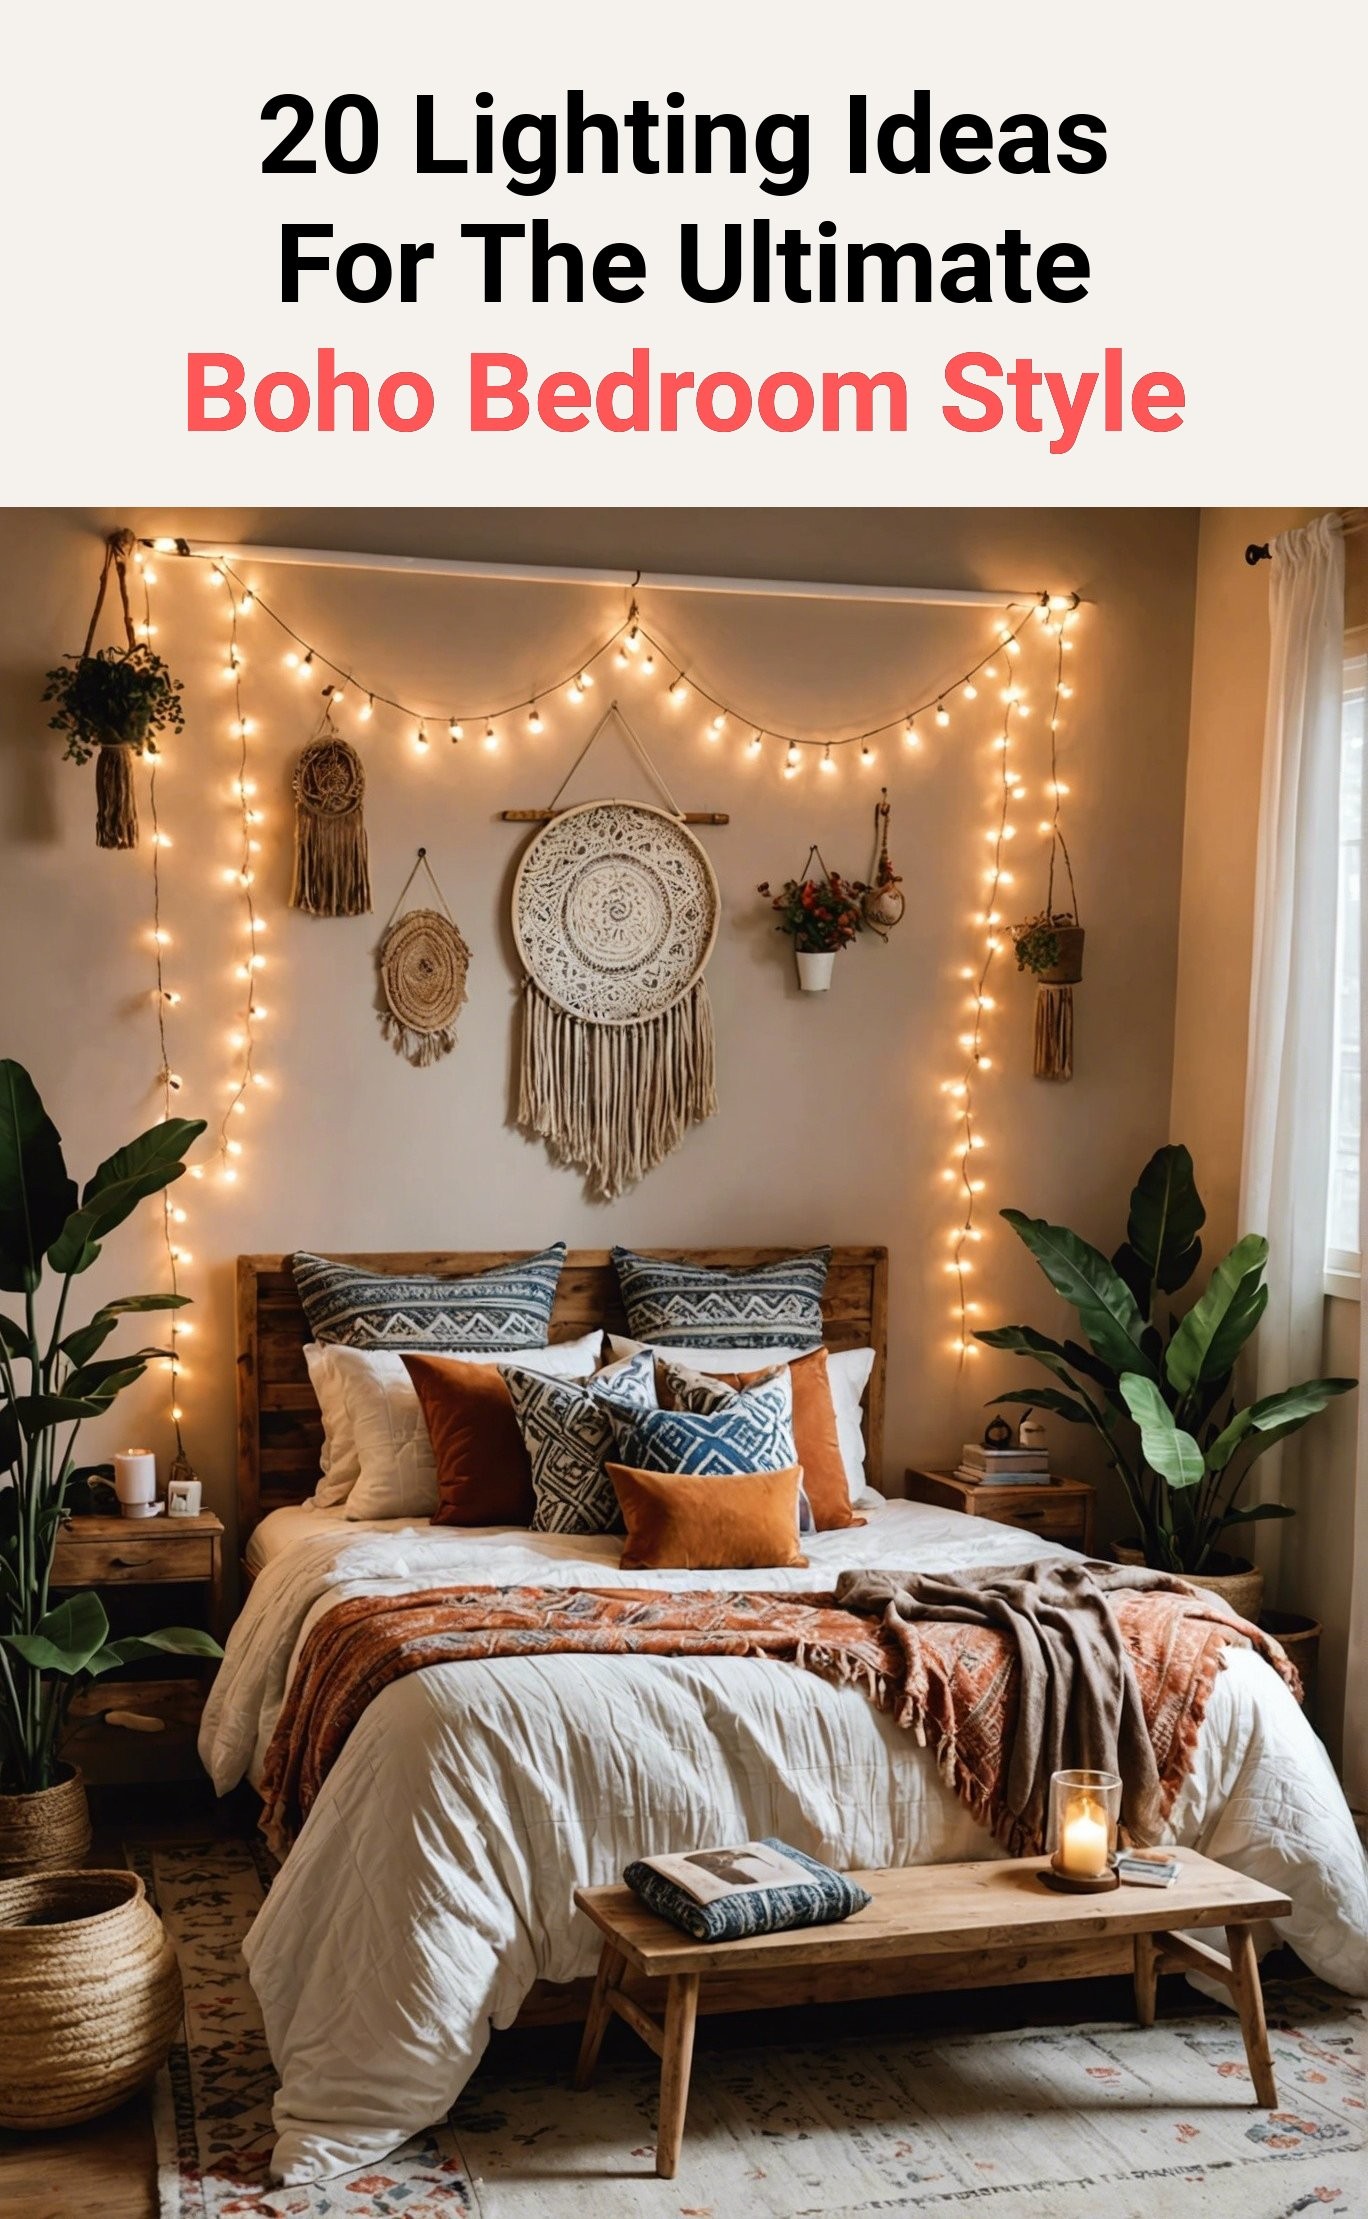 20 Lighting Ideas For The Ultimate Boho Bedroom Style